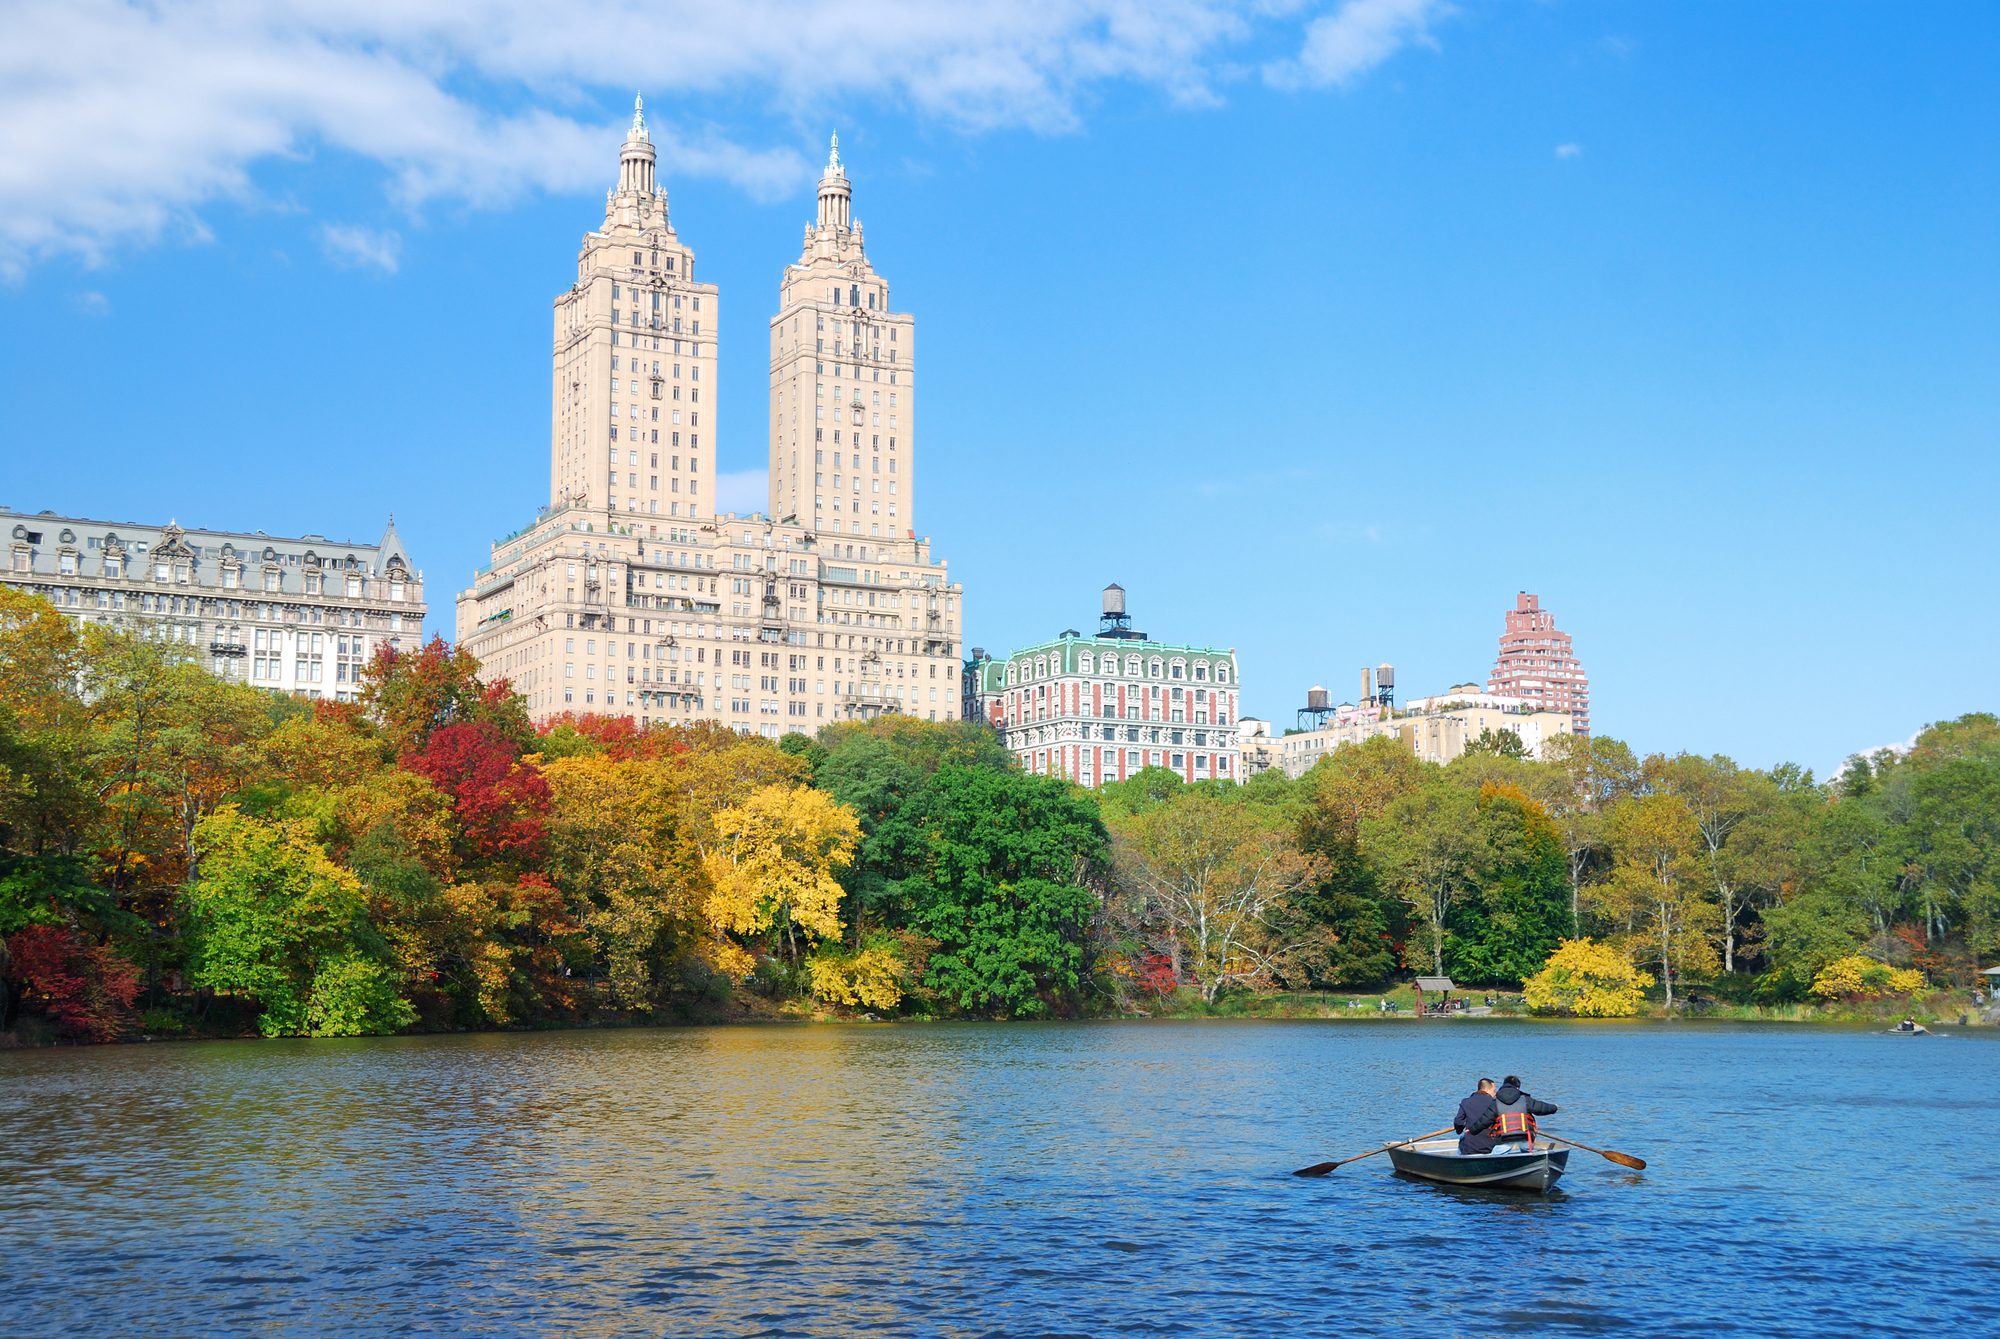 New York City Travel Guide - Vacation Ideas